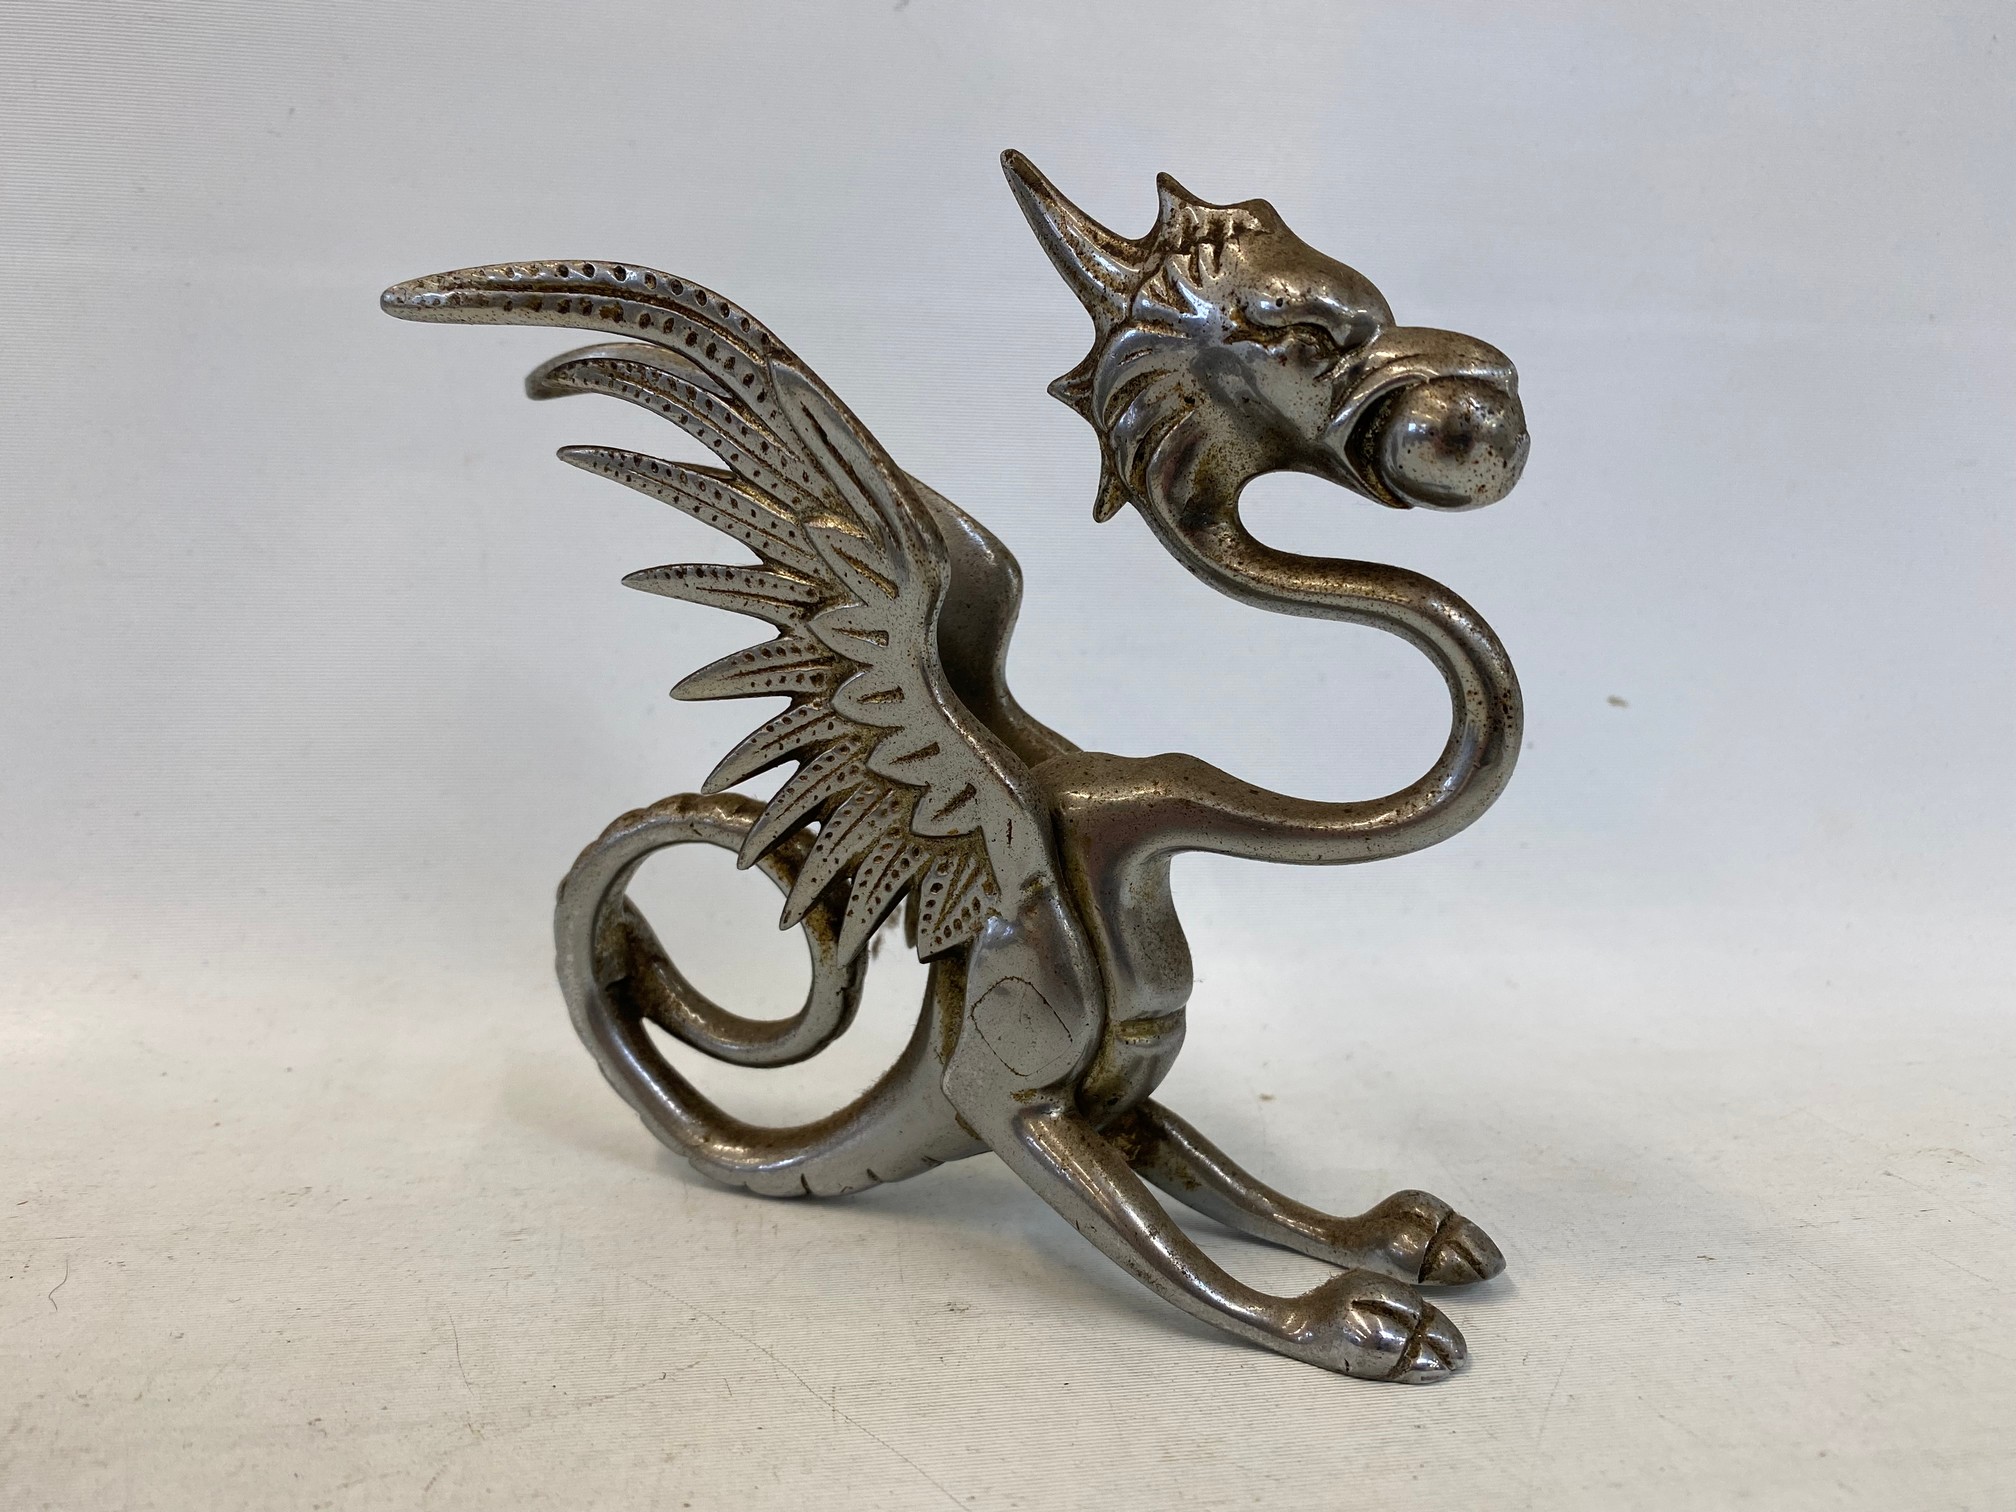 A chrome plated car mascot in the form of a griffin or dragon.